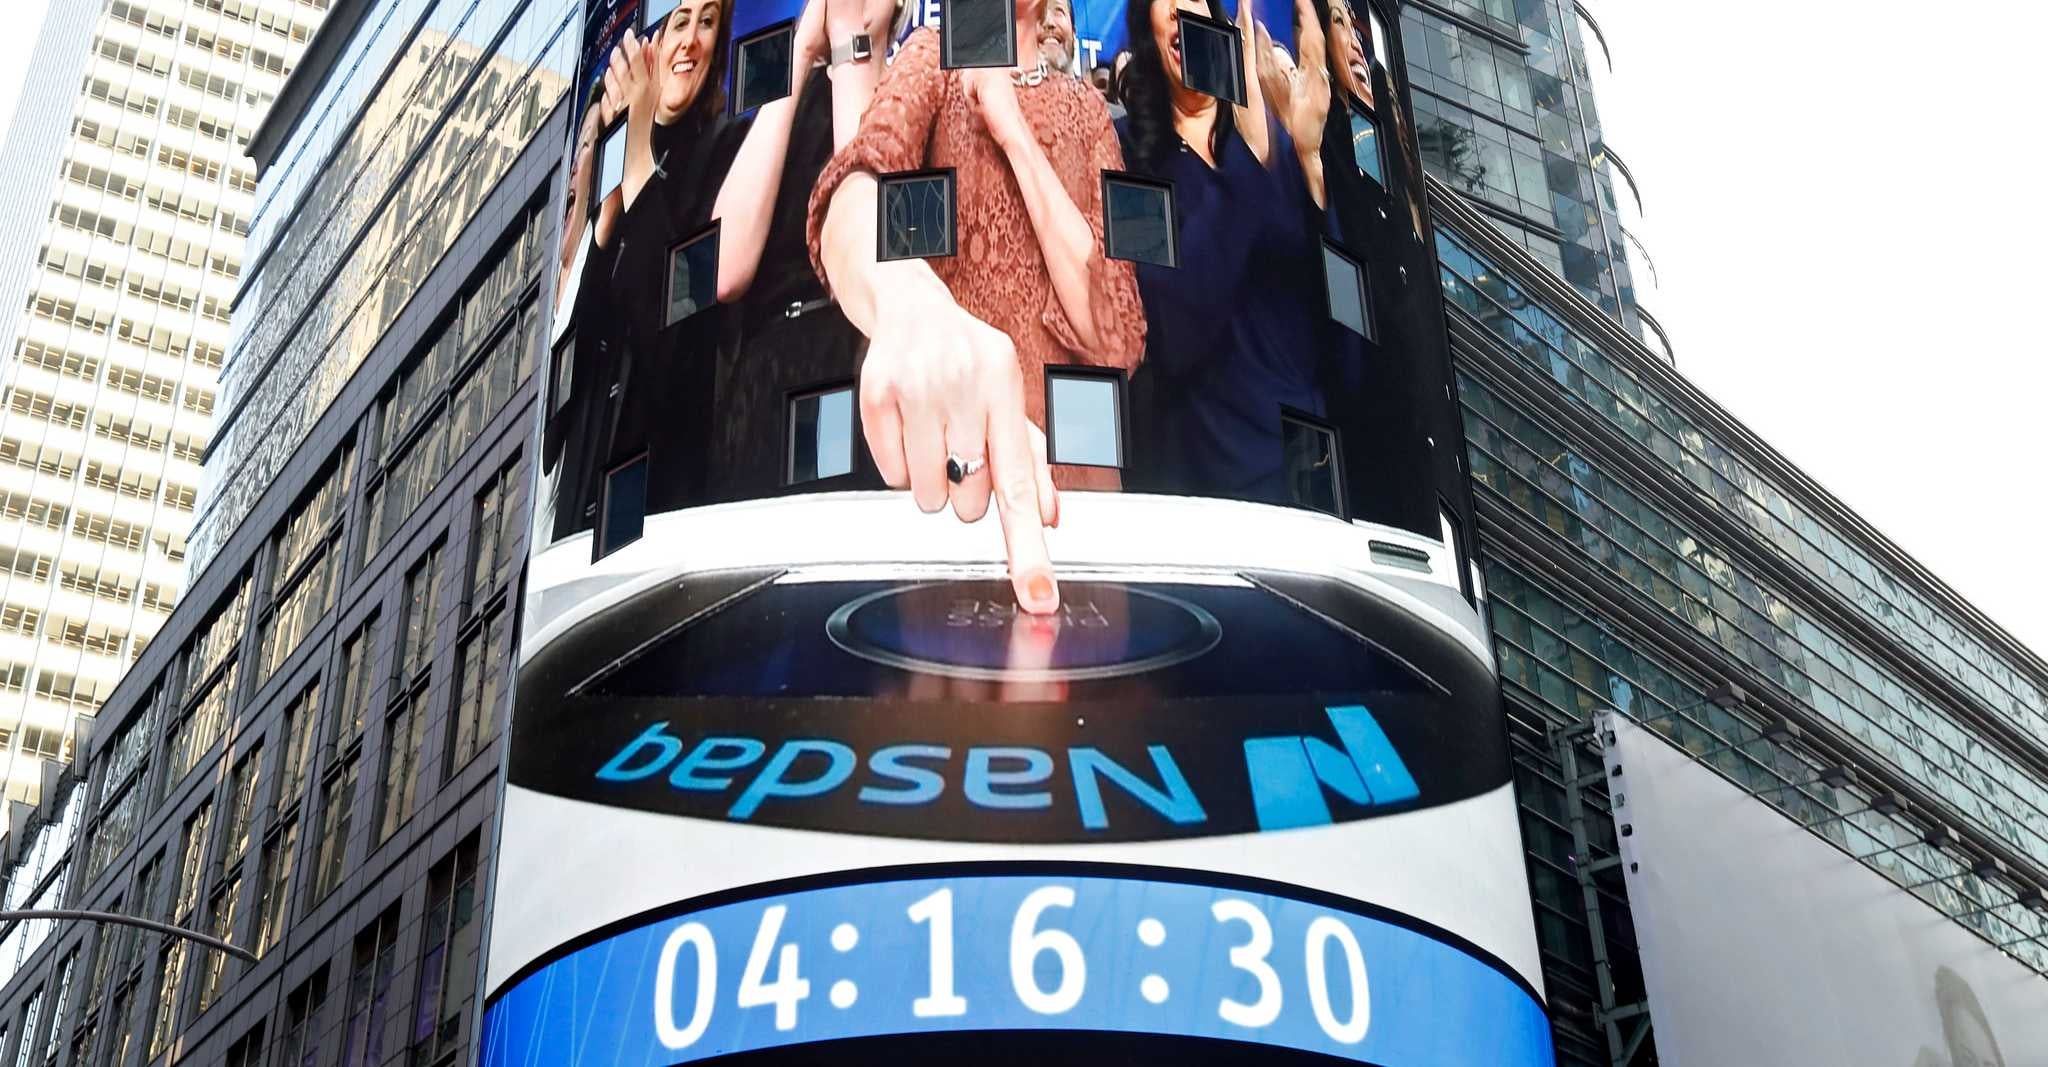 International Women's Day 2019: Ring The Bell for Gender Equality at Nasdaq. Photo: UN Women/Ryan Brown.